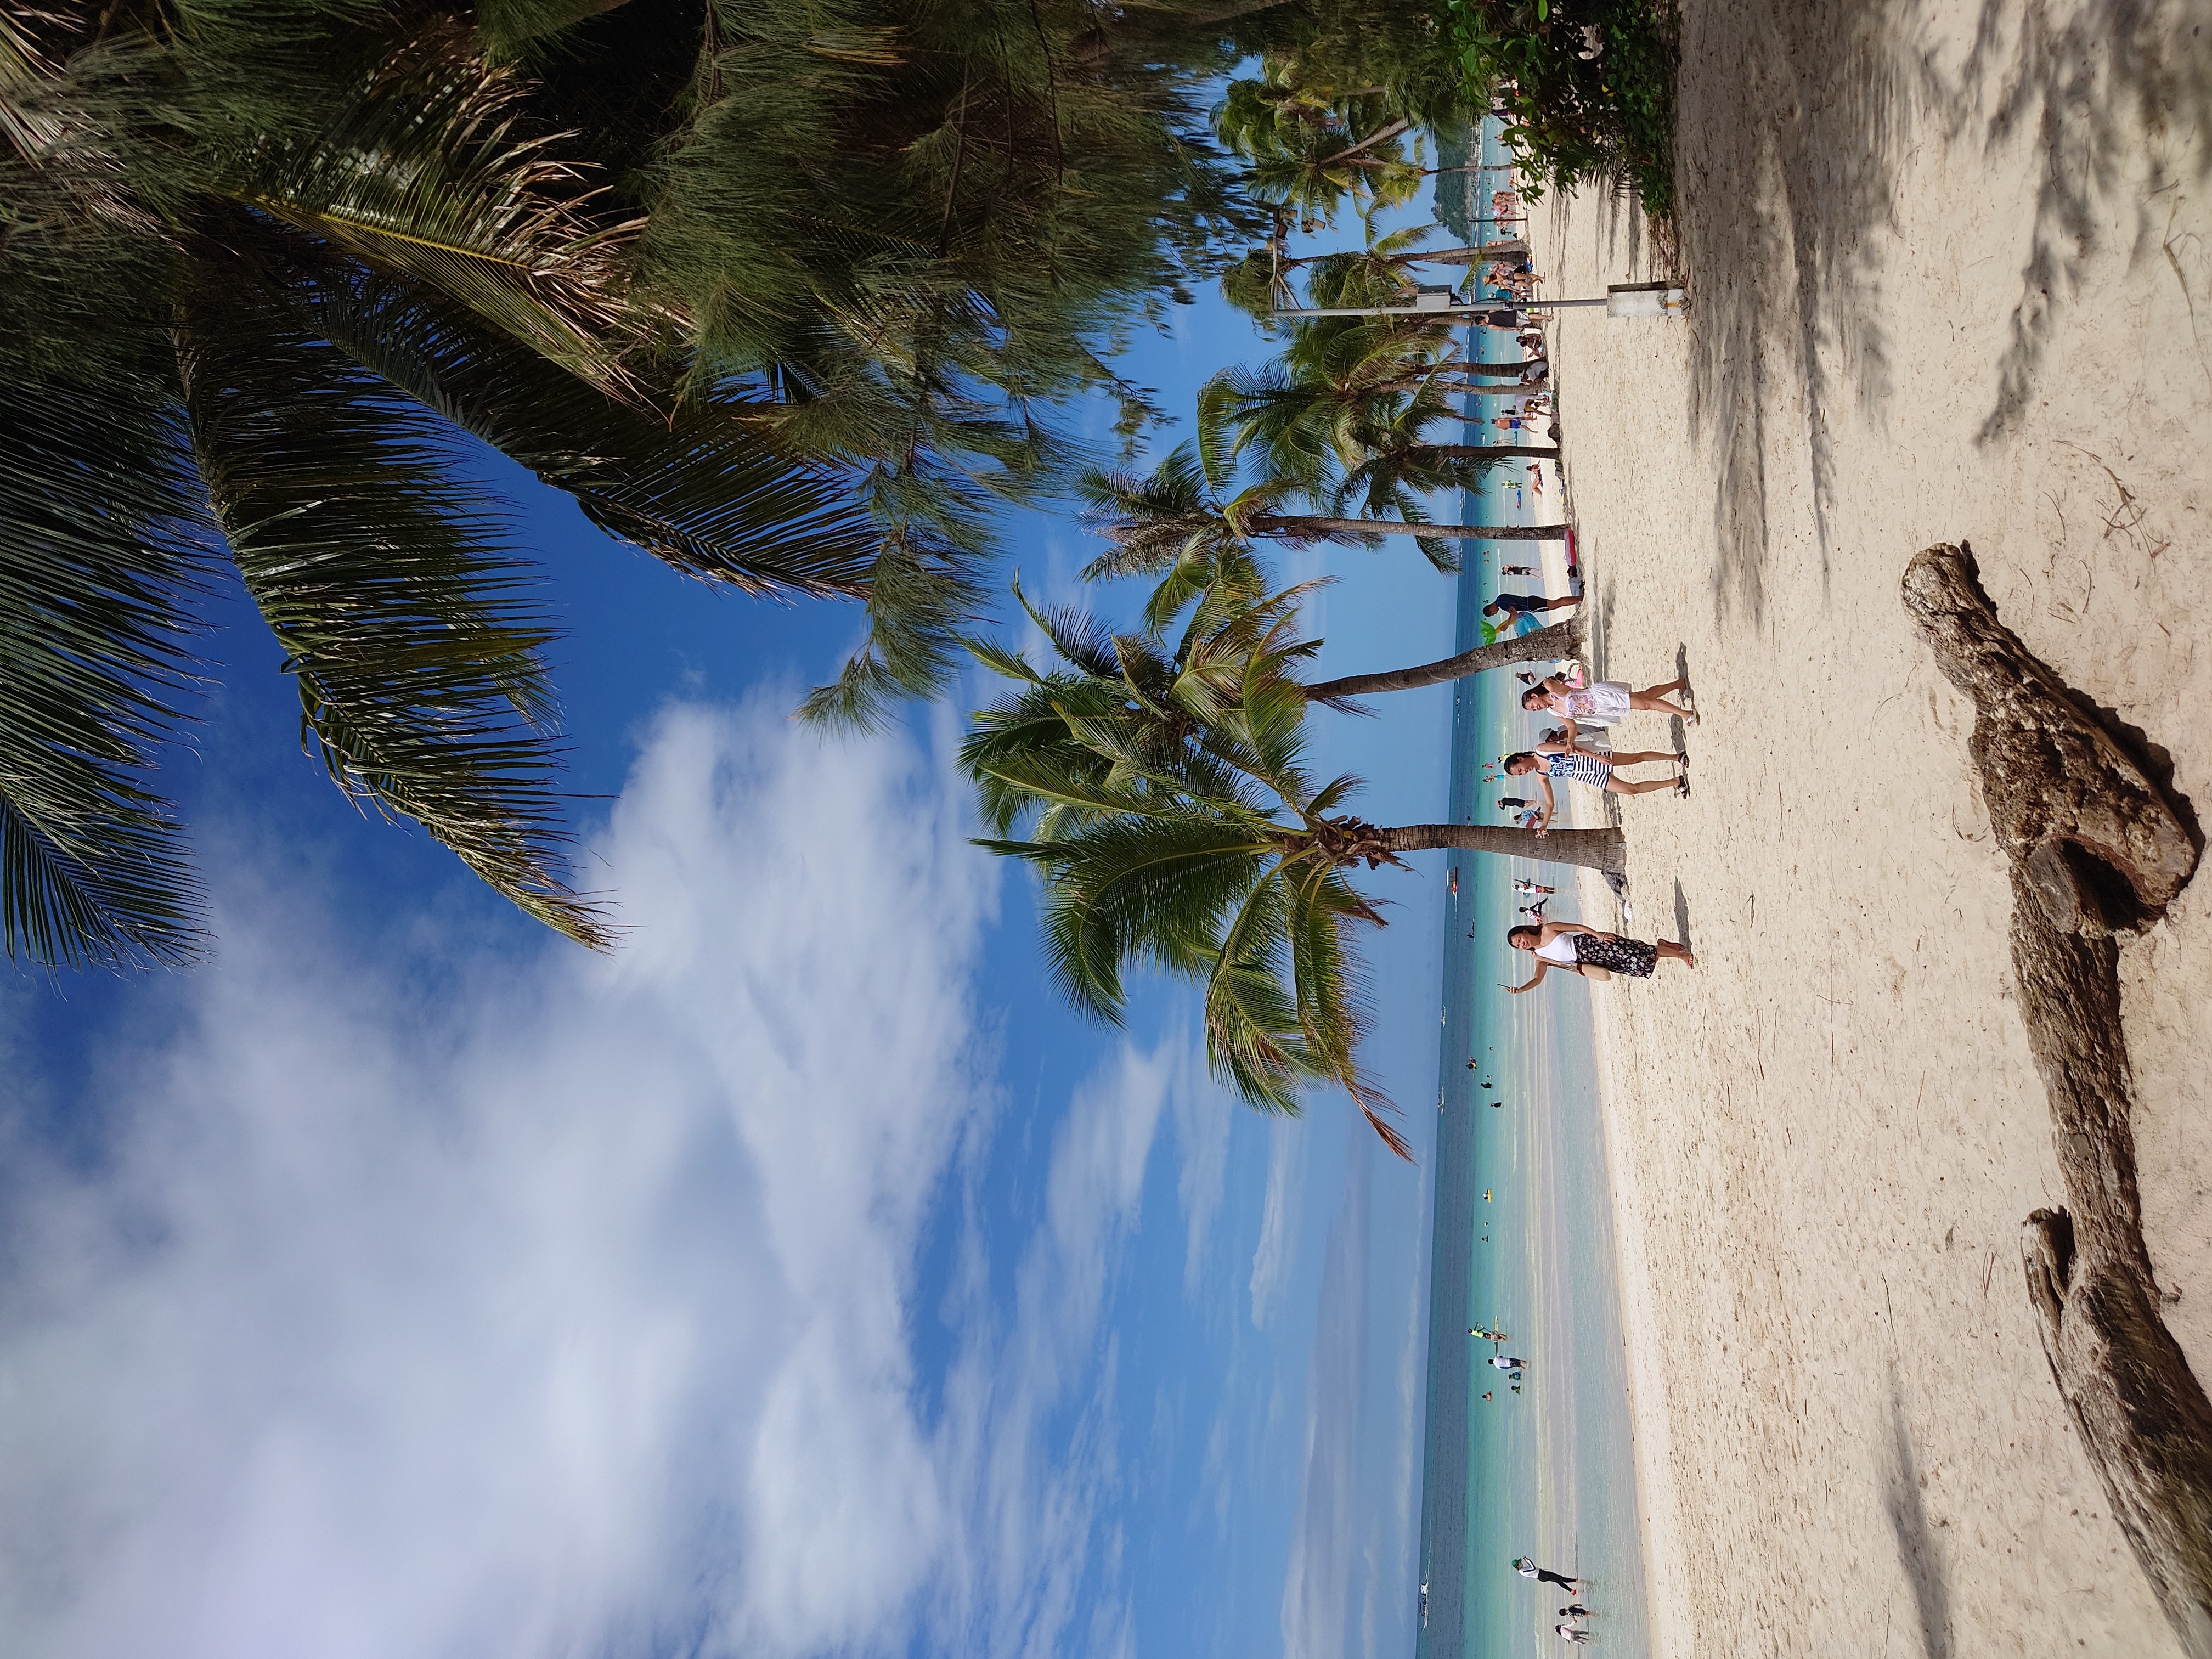 Palm trees along White Beach in Boracay, Philippines